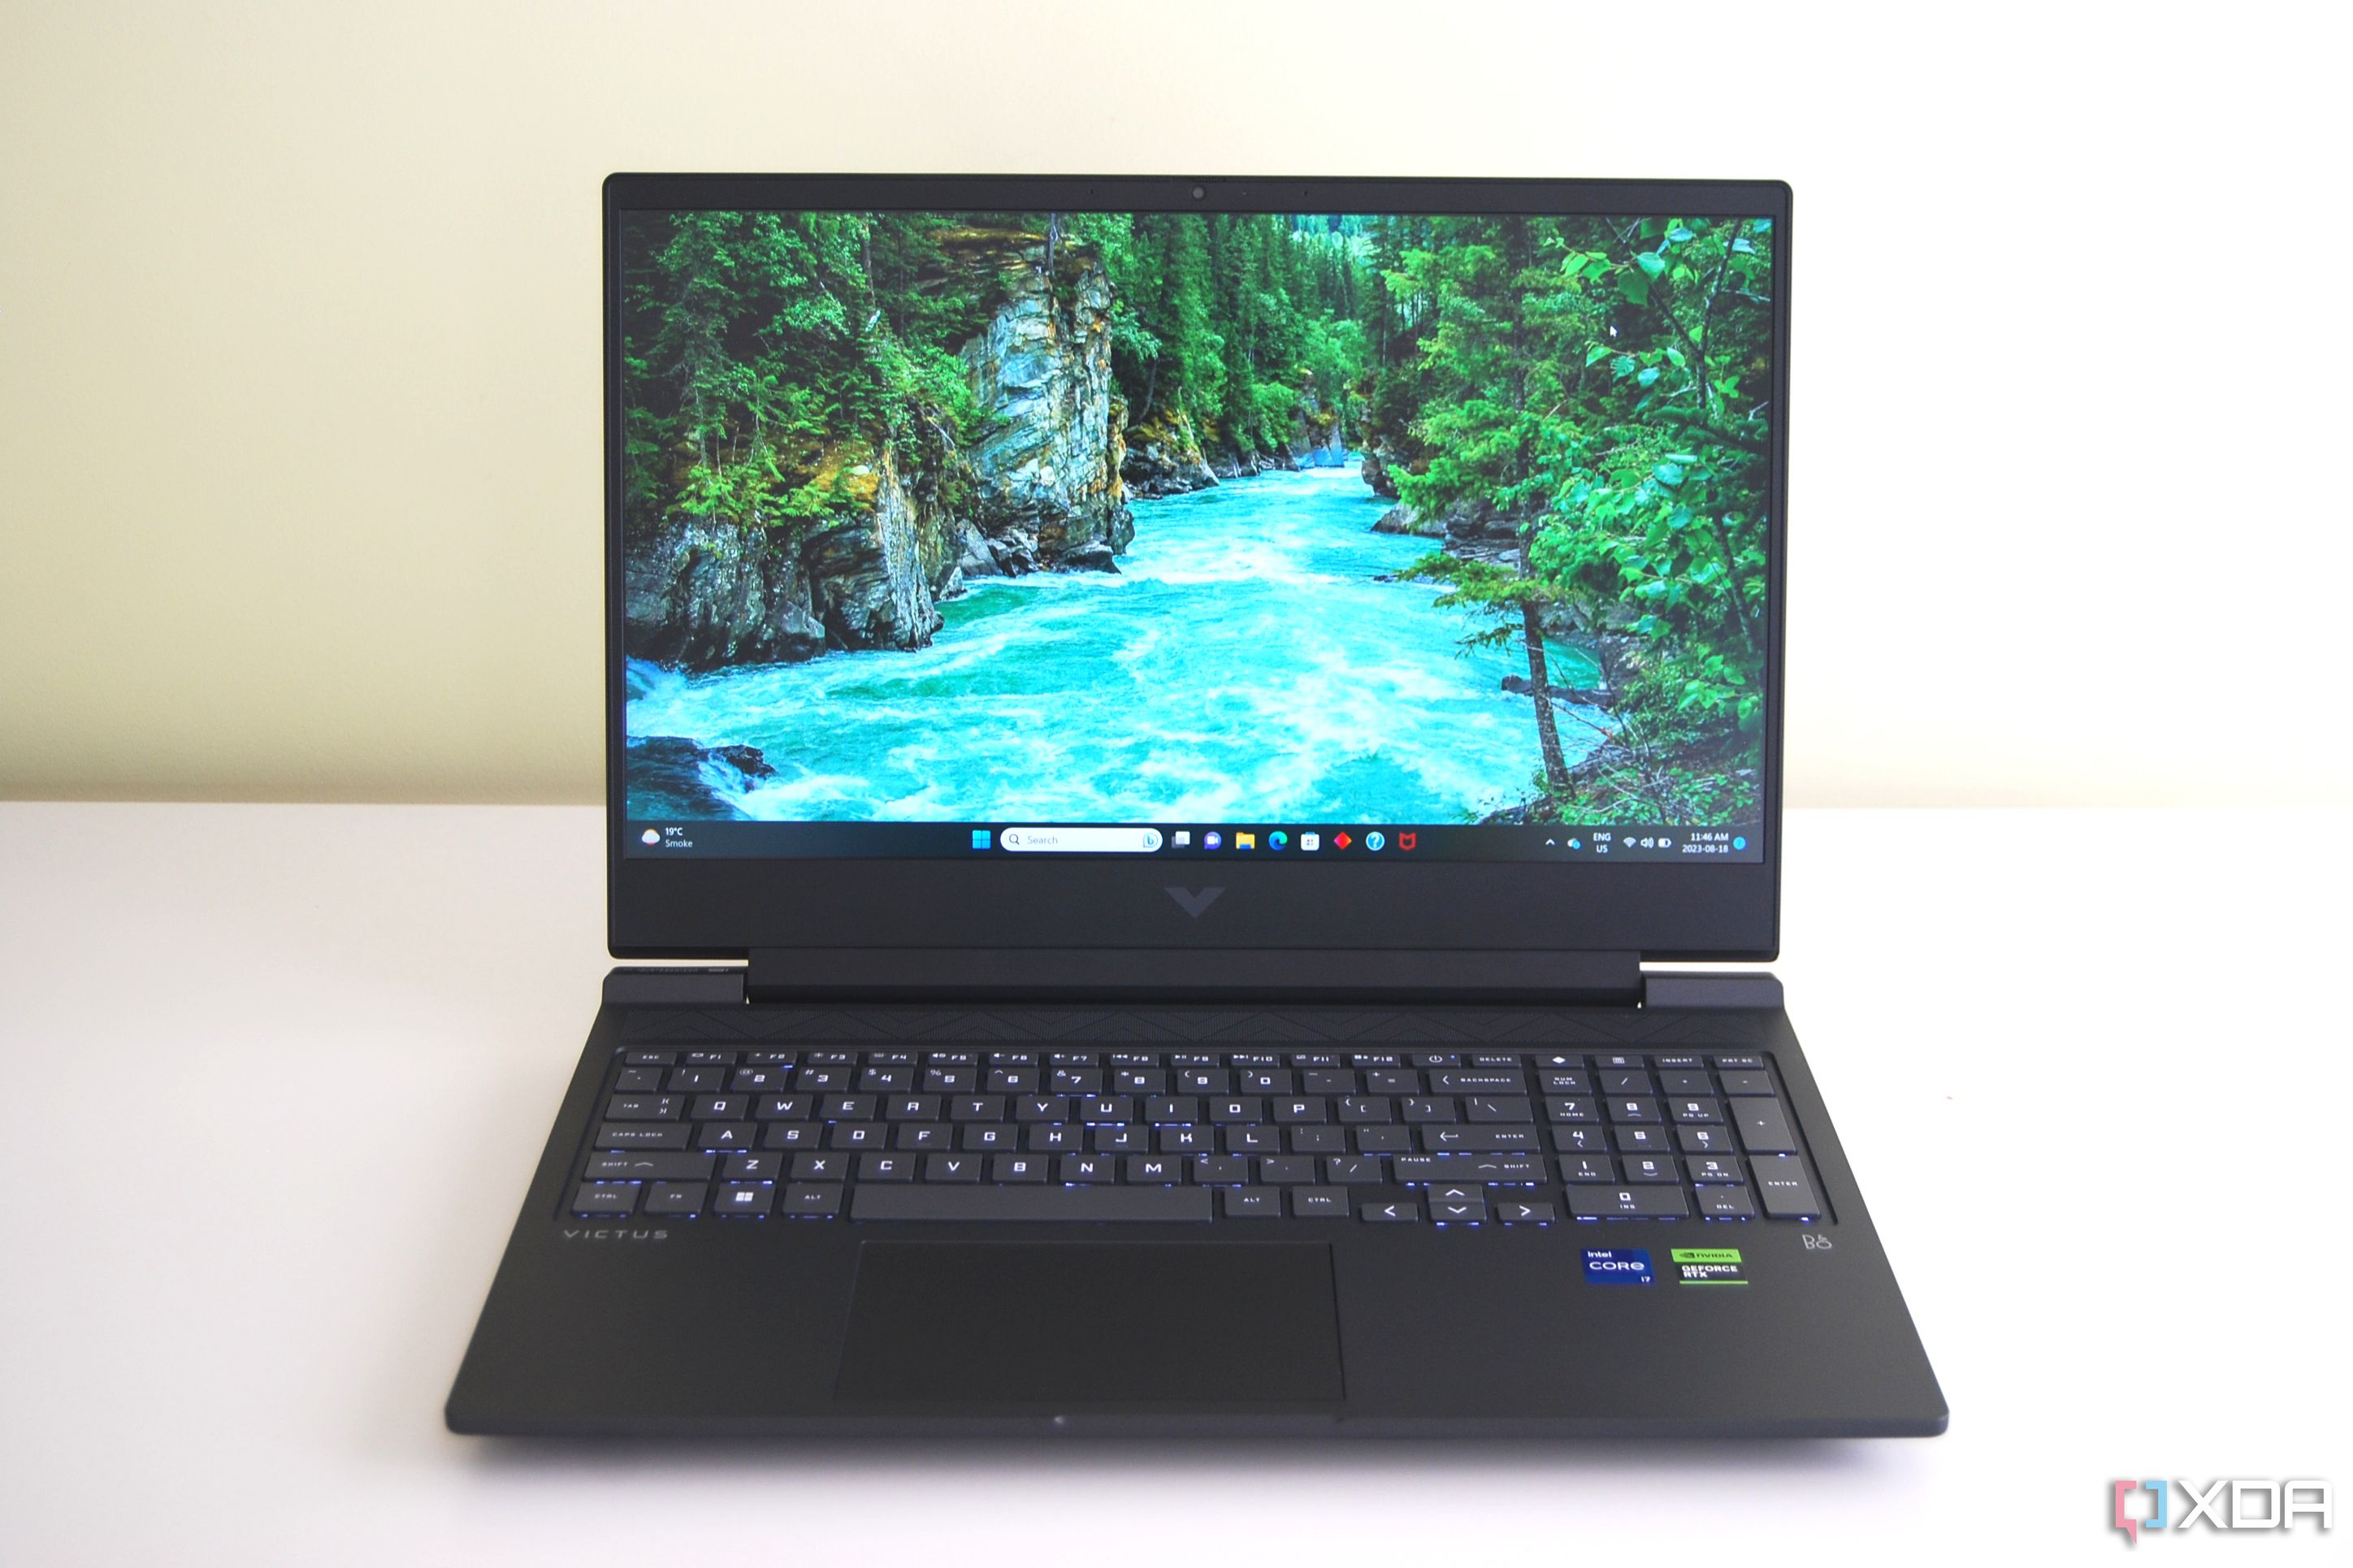 HP Victus 16 review: Affordable gaming laptop with AMD CPU and Nvidia GPU -   Reviews